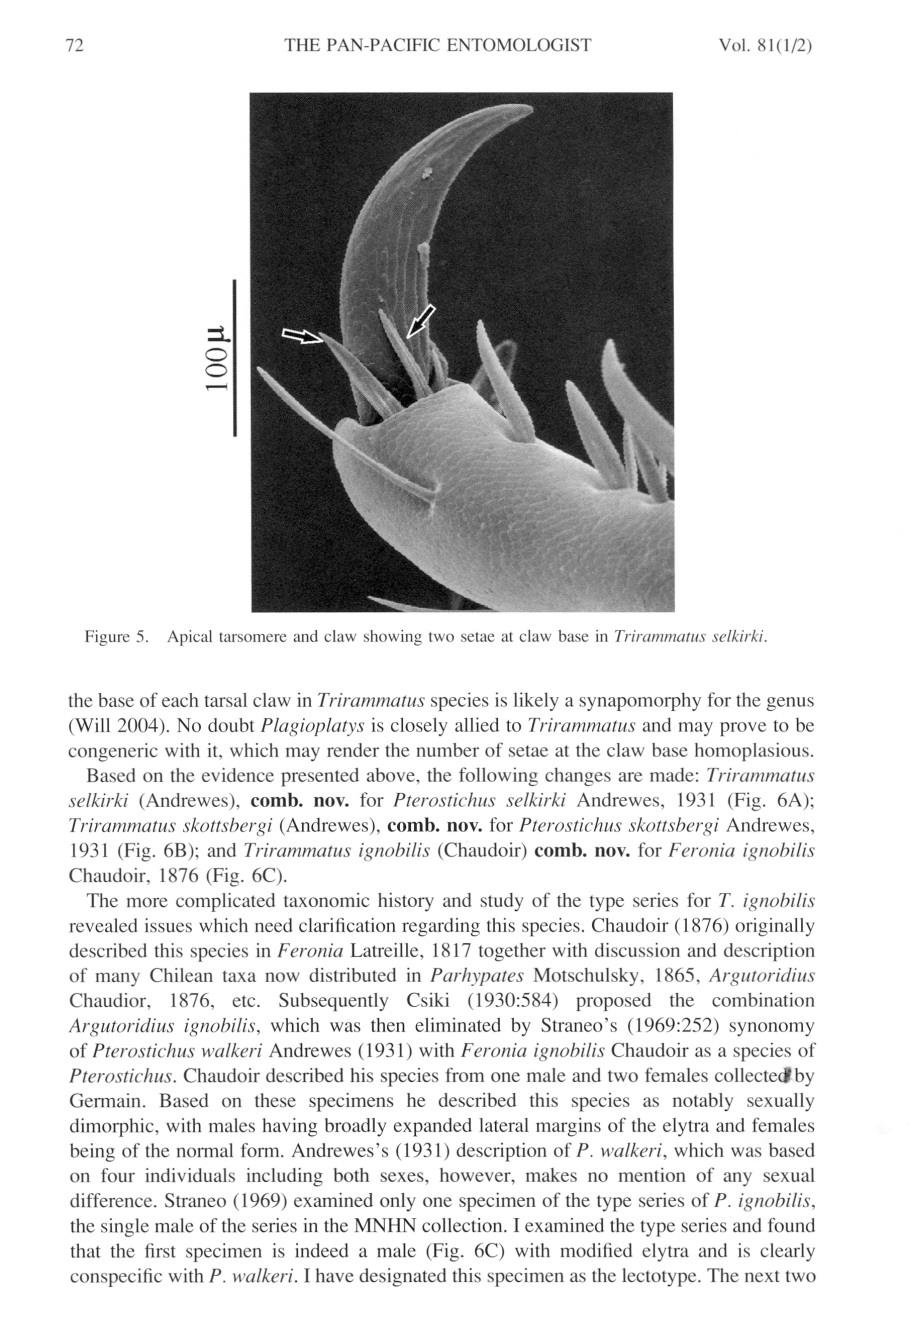 72 THE PAN-PACIFIC ENTOMOLOGIST Vol. 81(\12) :t. o 4 Figure 5. Apical tarsomere and claw showing two setae at claw base in Trirammatus selkirki.